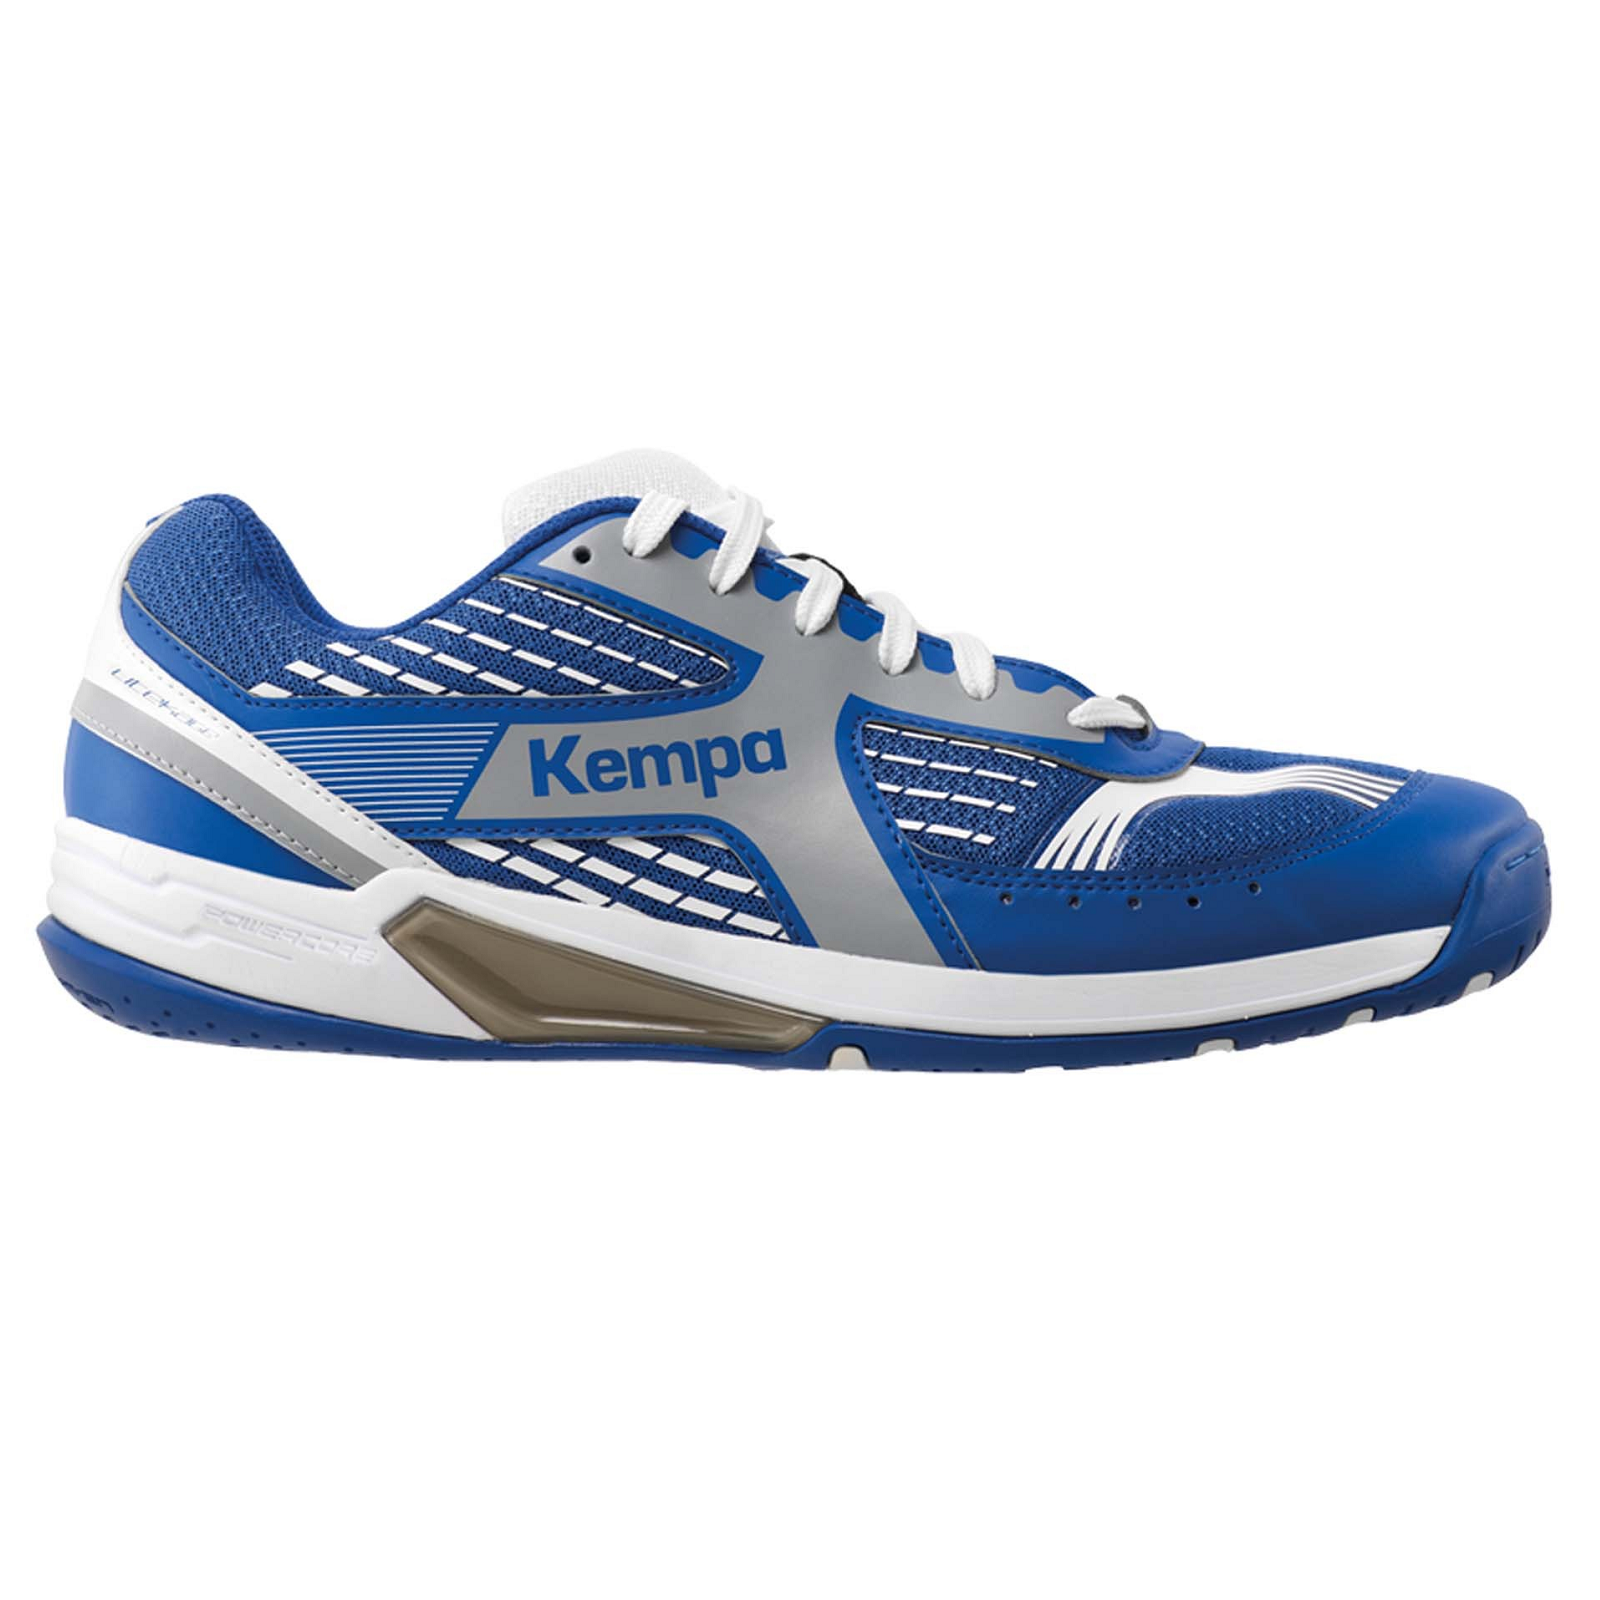 Kempa Fly High Wing Indoor Sport Handball Shoes Trainers blue 20